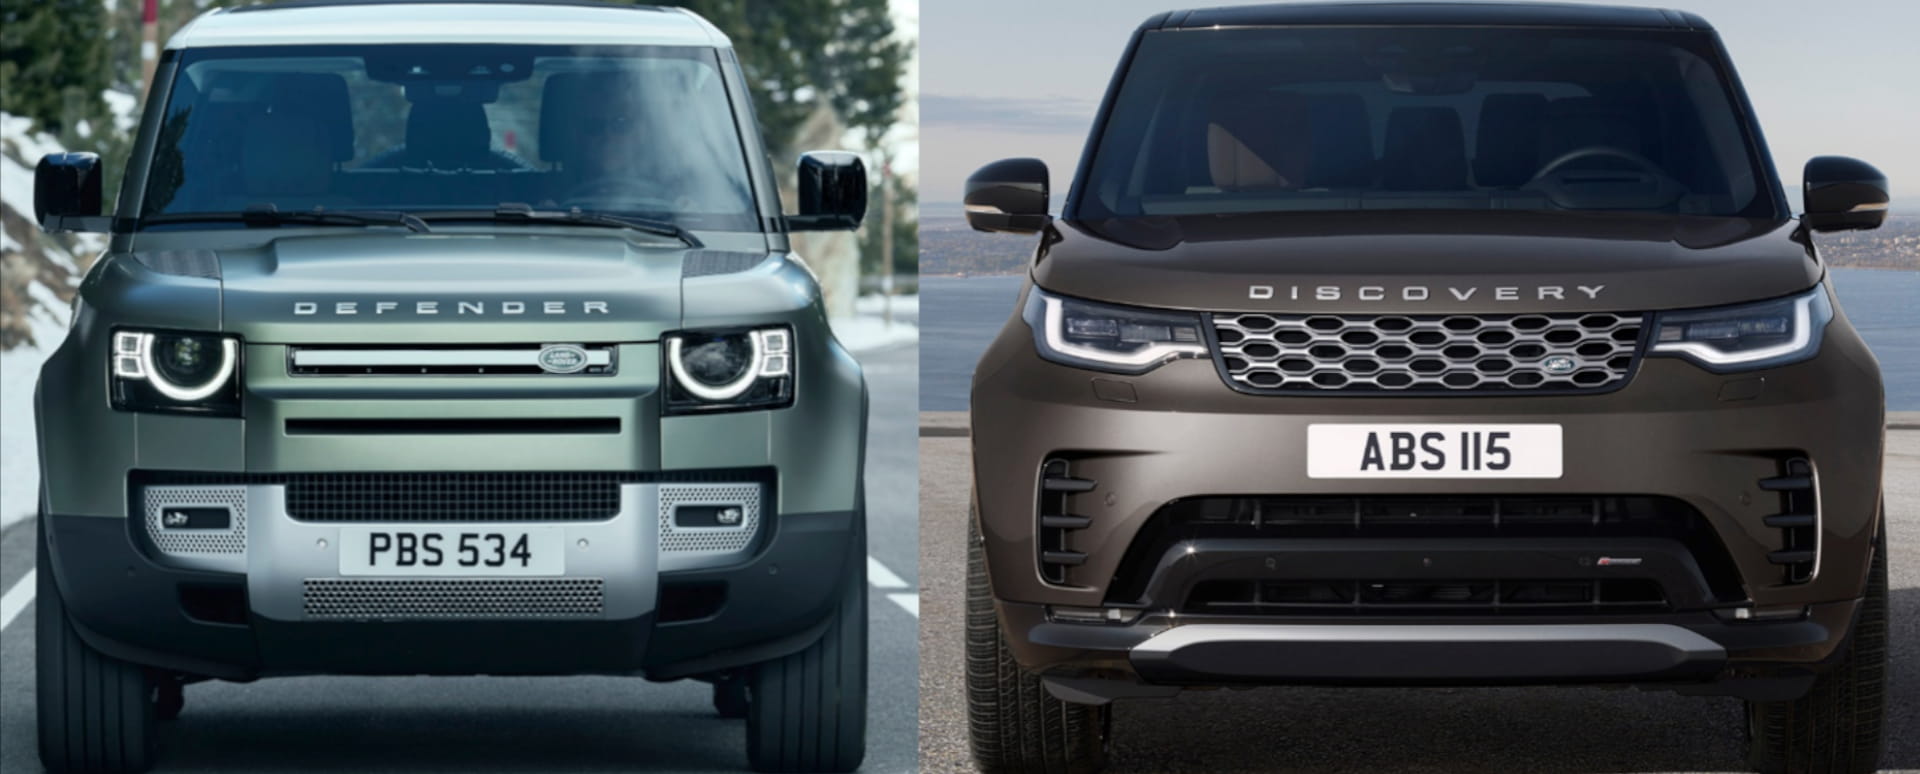 Defender vs Discovery 